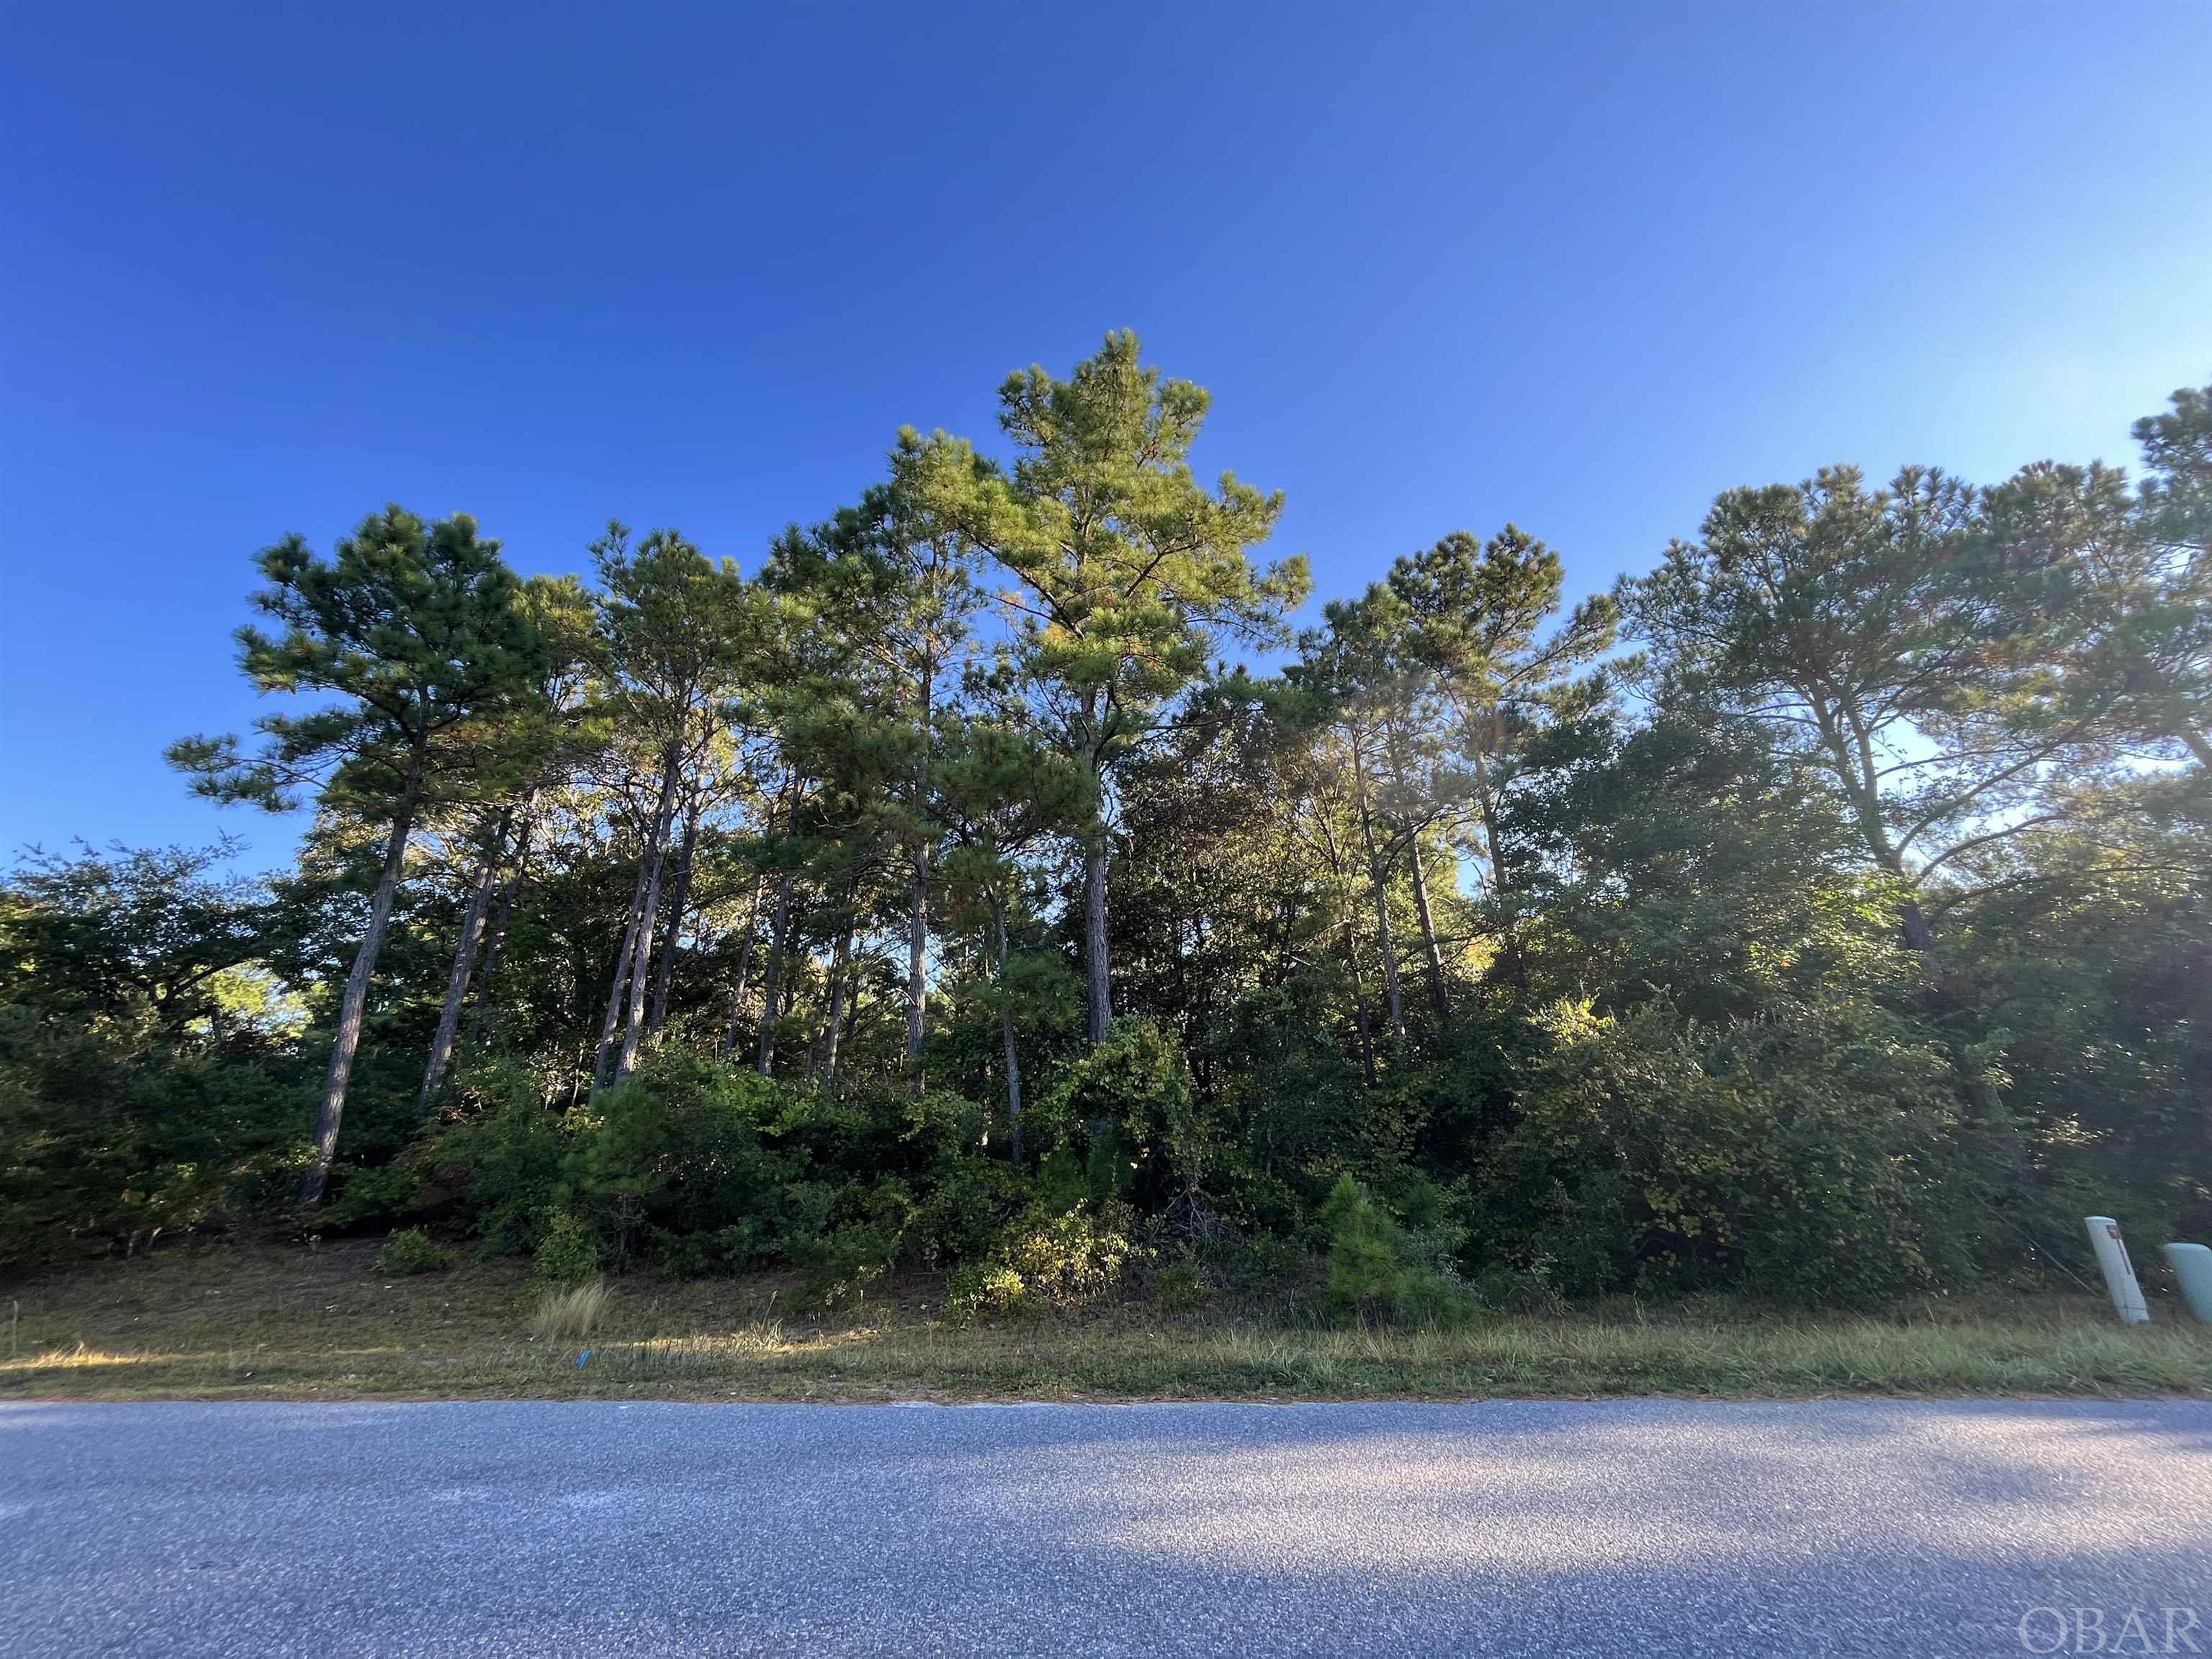 For anyone looking to build a brand-new home, this premium homesite backing into park reserve in a quiet neighborhood is the one.  Almost half an acre of land wooded with marvelous tall pines will give you an opportunity to preserve a lot of privacy for your new home. And just a short ride would take you to all wonderful amenities the Town of Manteo has to offer, such as Roanoke Island Aquarium, Lost Colony, Elizabethan Gardens, and charming downtown Manteo.  Make sure to check out Croatan Soundfront park right next to aquarium just a bike ride away.  Come see it today and fall in love!